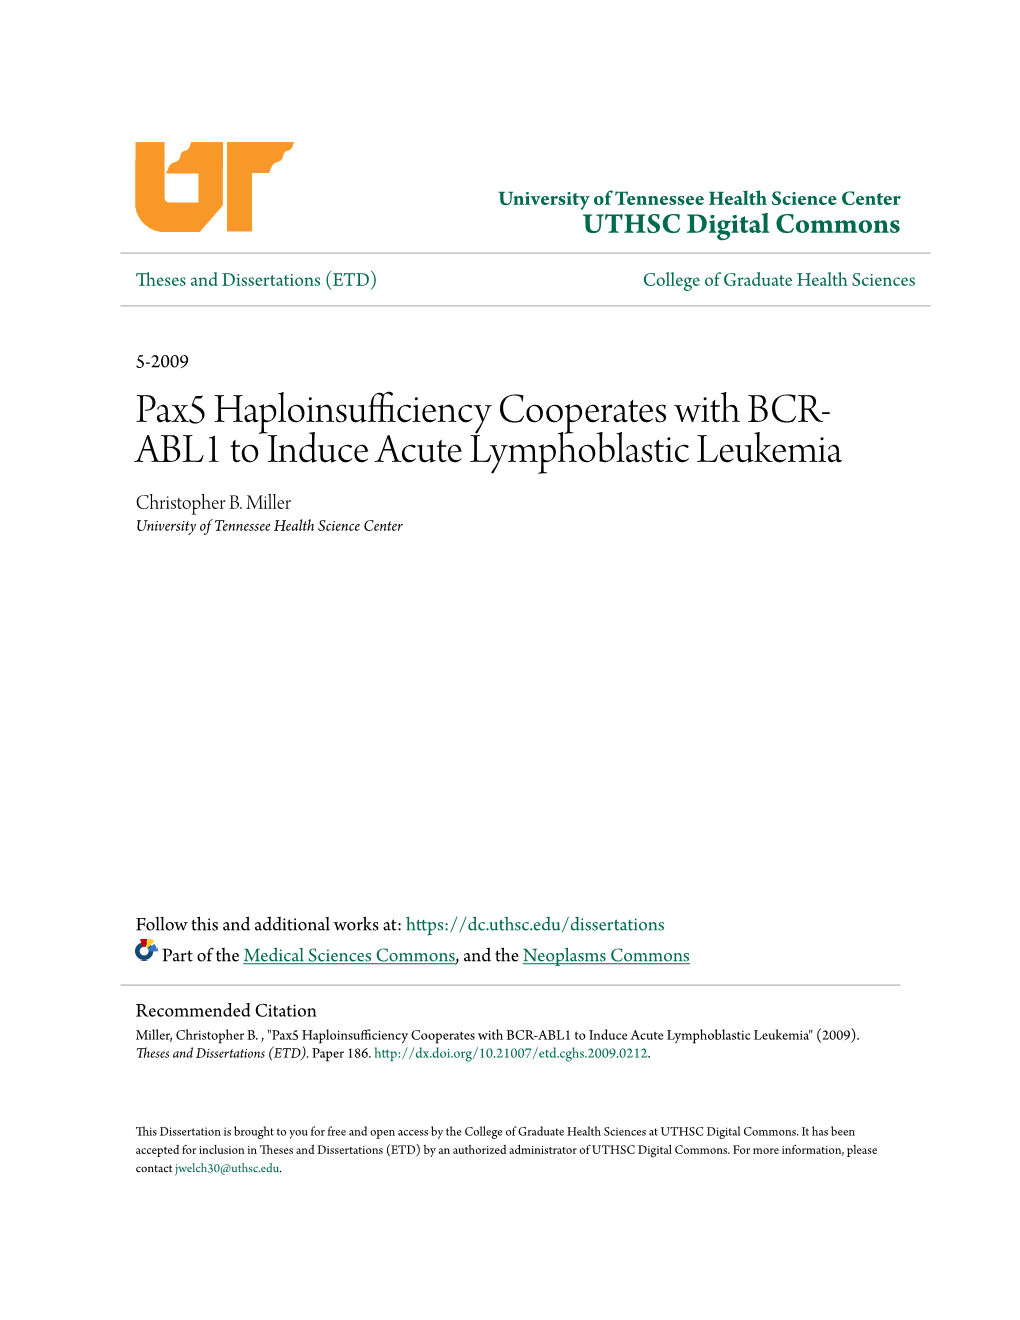 Pax5 Haploinsufficiency Cooperates with BCR-ABL1 to Induce Acute Lymphoblastic Leukemia" (2009)